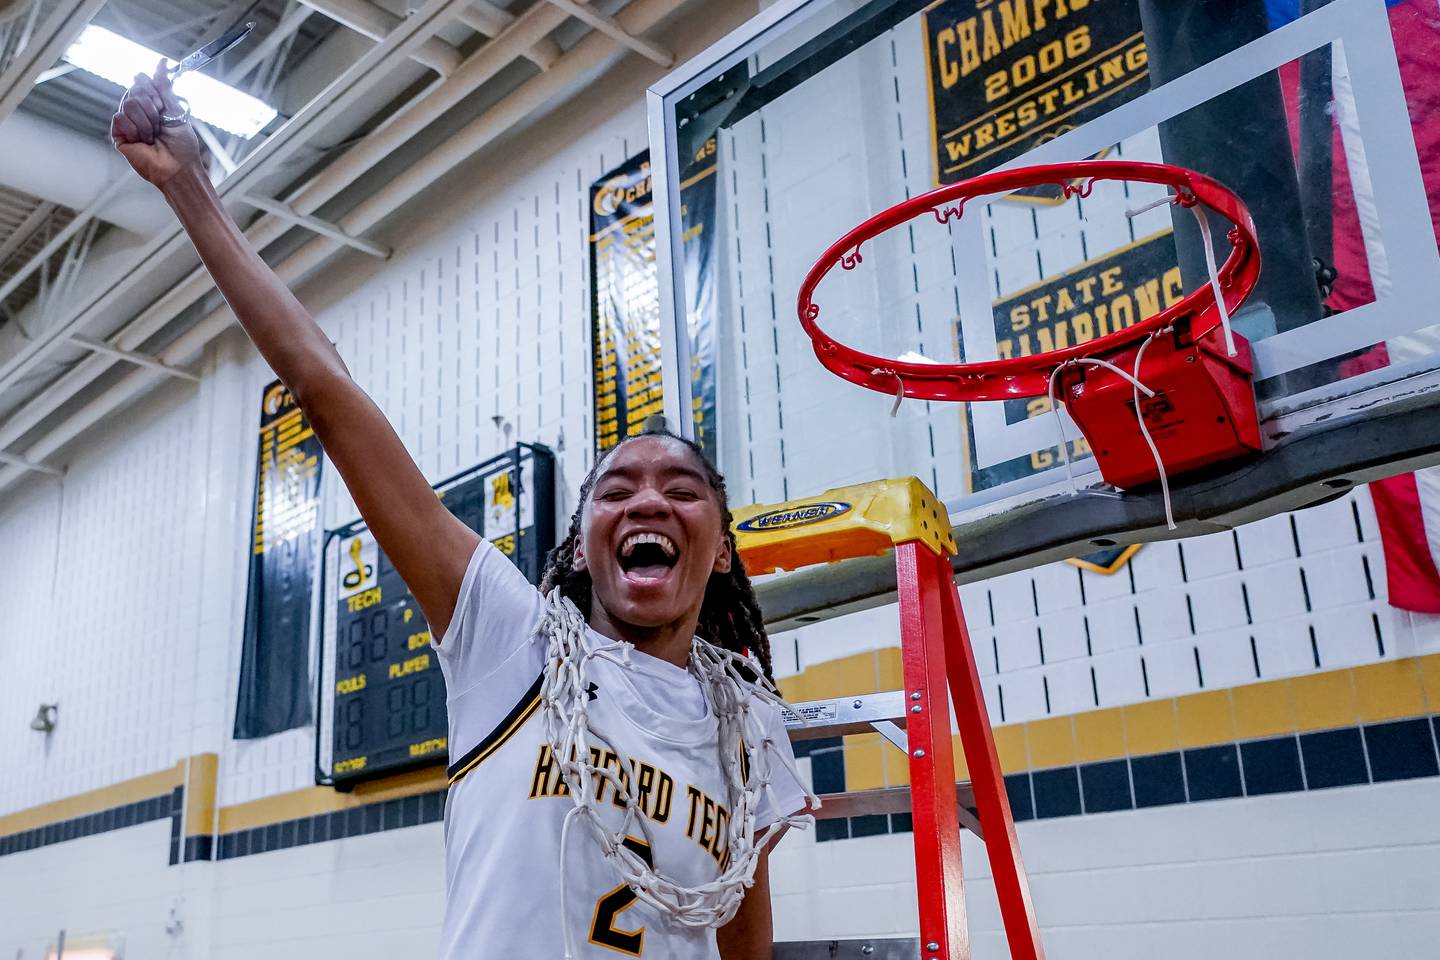 Harford TechÕs Anyia Gibson celebrates after cutting down the net after the MPSSAA High School Girls 2A East Region Playoff Final between the Fallston Cougars and Harford Tech Cobras at Harford Tech High School in Bel Air, Maryland on March 1, 2023. Harford Tech won 41-27. photo by Scott Serio for The Baltimore Banner